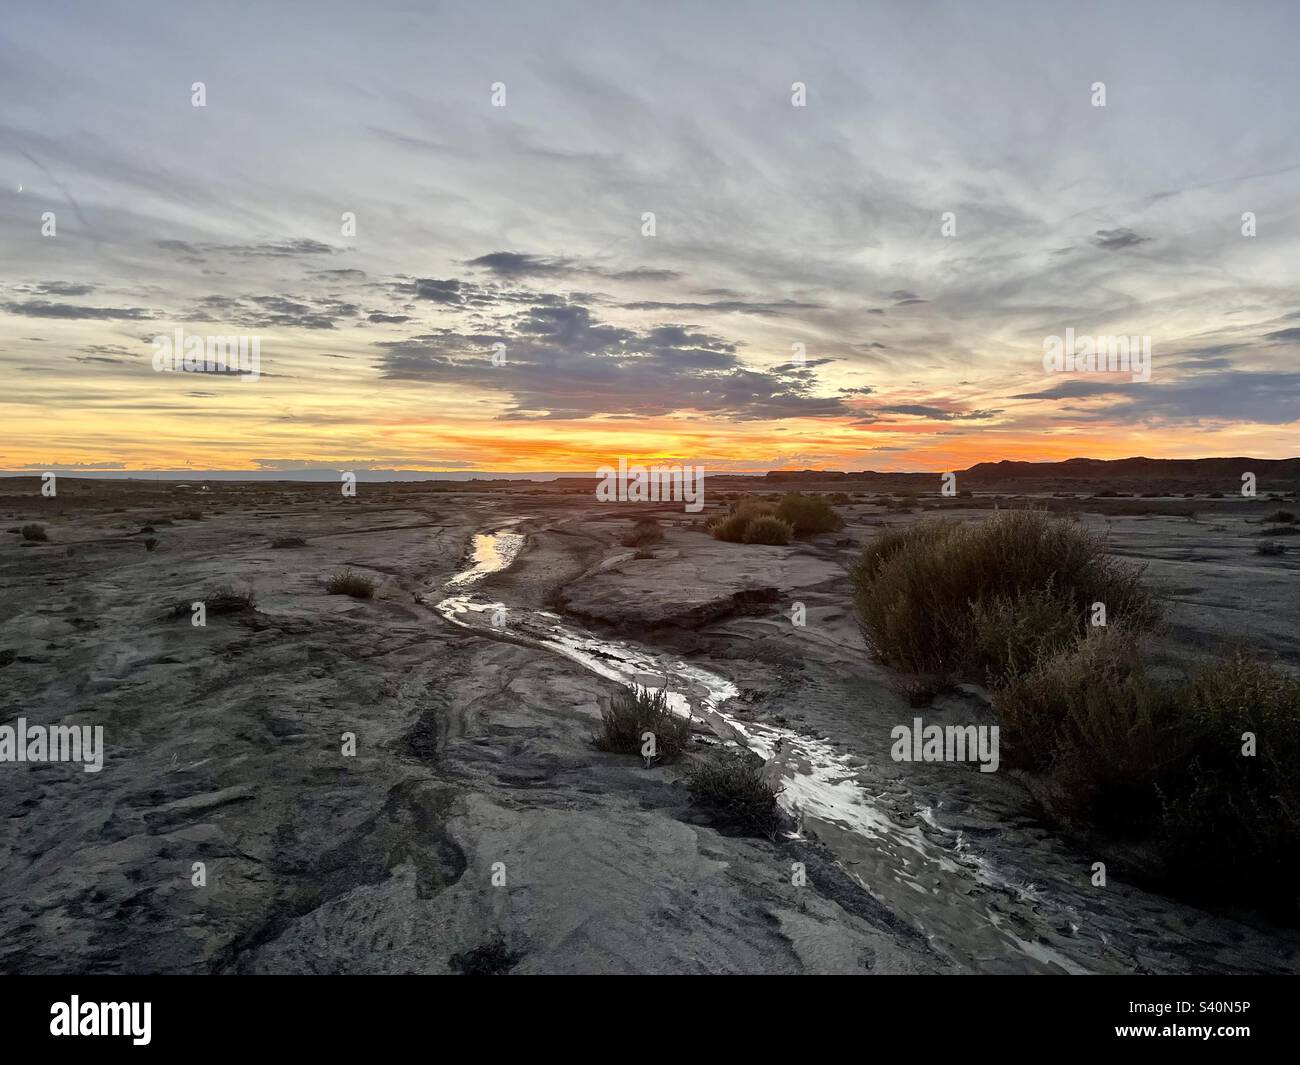 An arroyo with a little bit of water running in Bisti / De-Na-Zin Wilderness Area, New Mexico at sunset Stock Photo